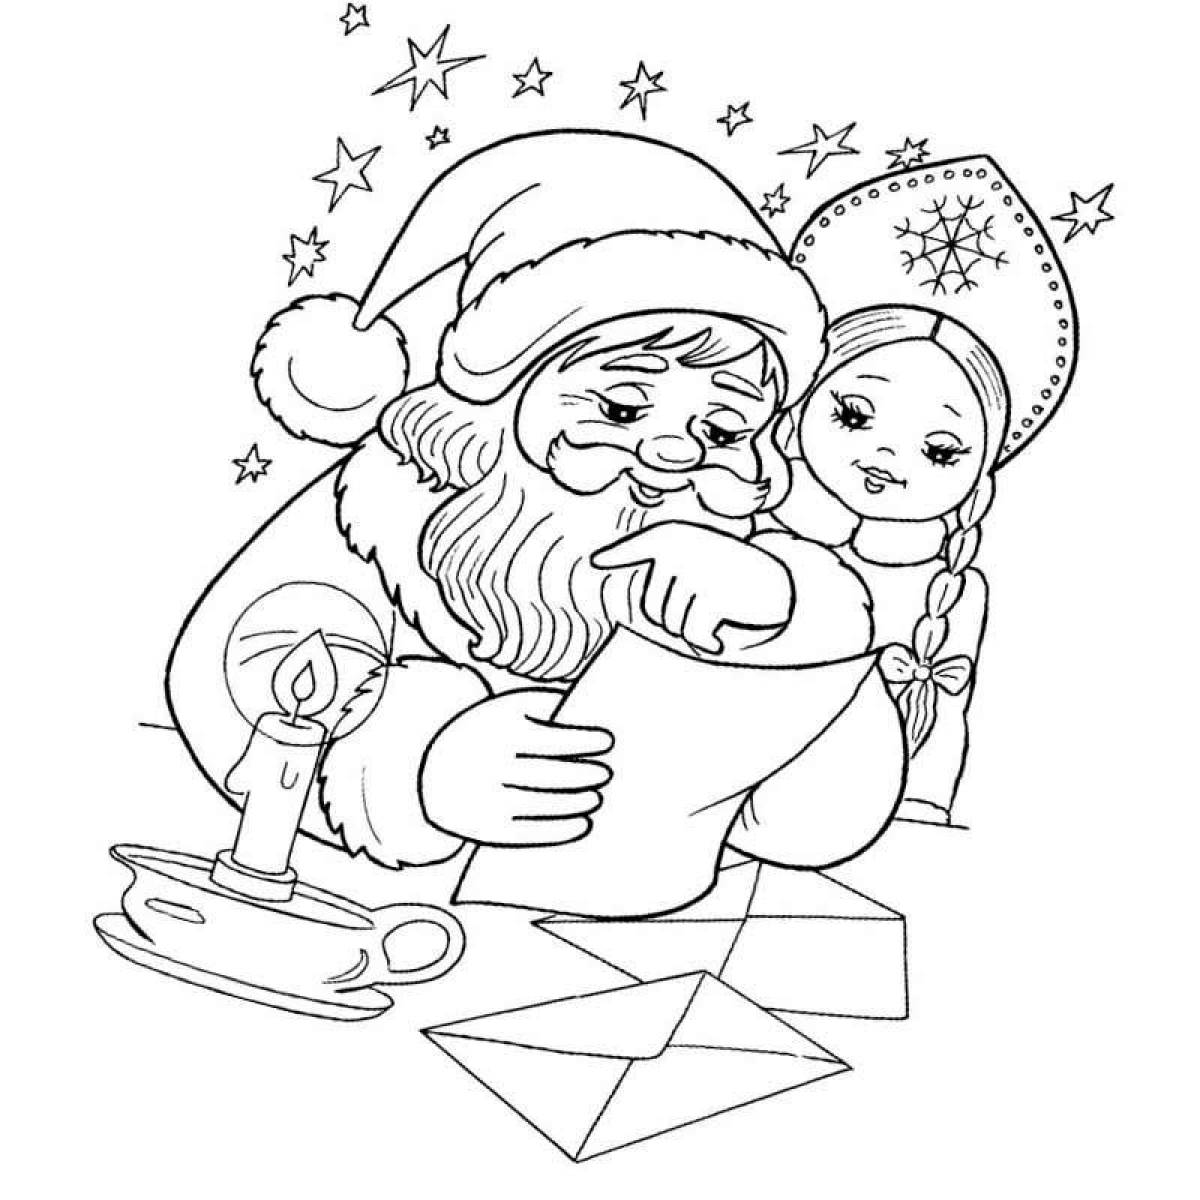 Glittering Christmas tree coloring page